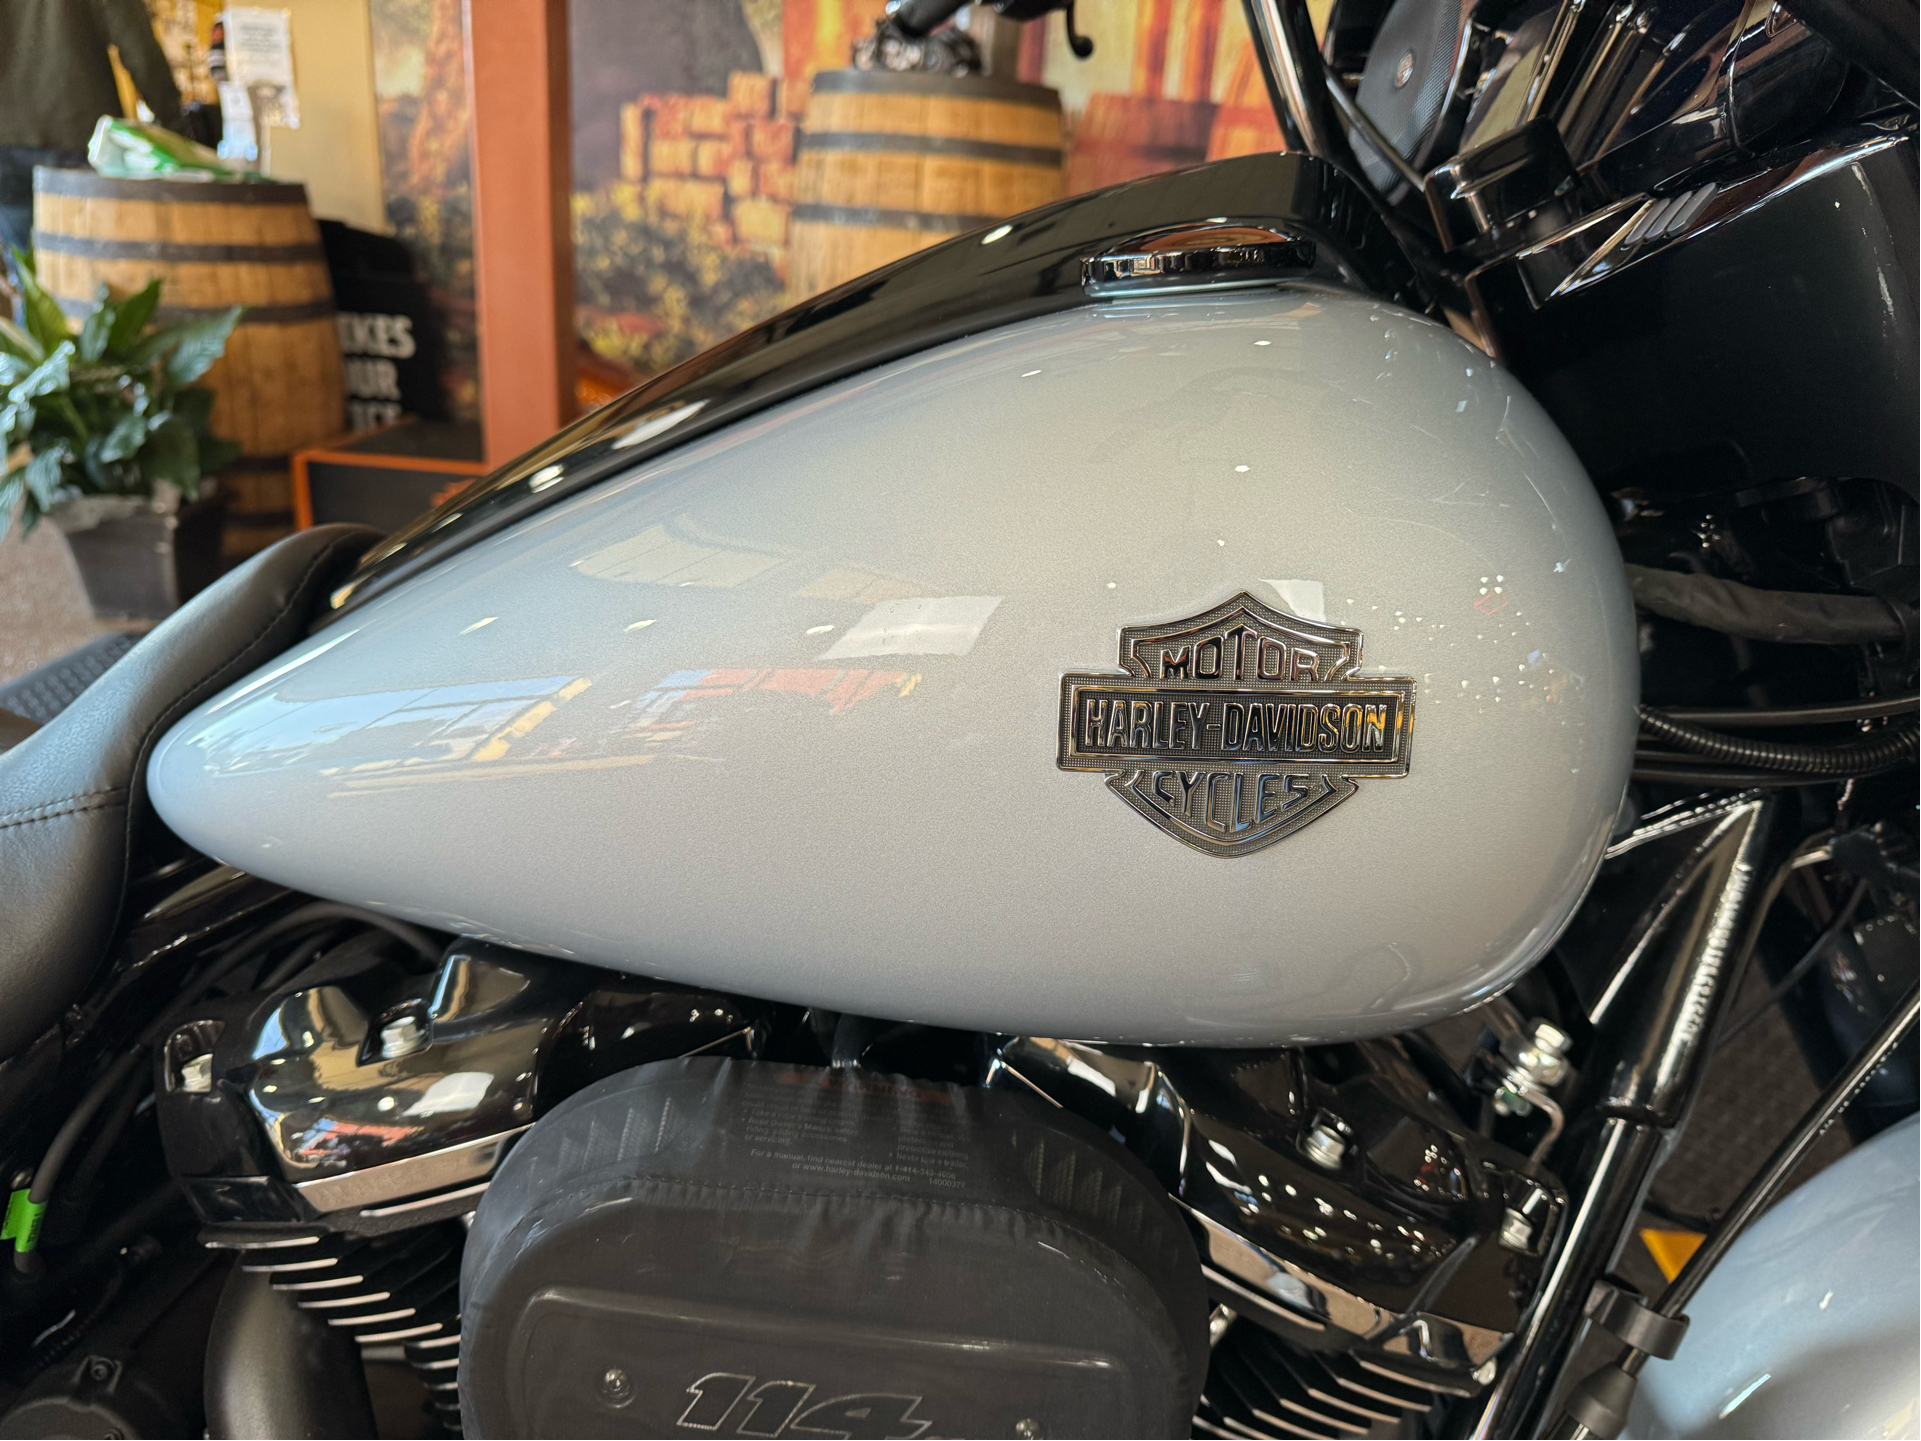 2023 Harley-Davidson Street Glide® Special in Knoxville, Tennessee - Photo 5